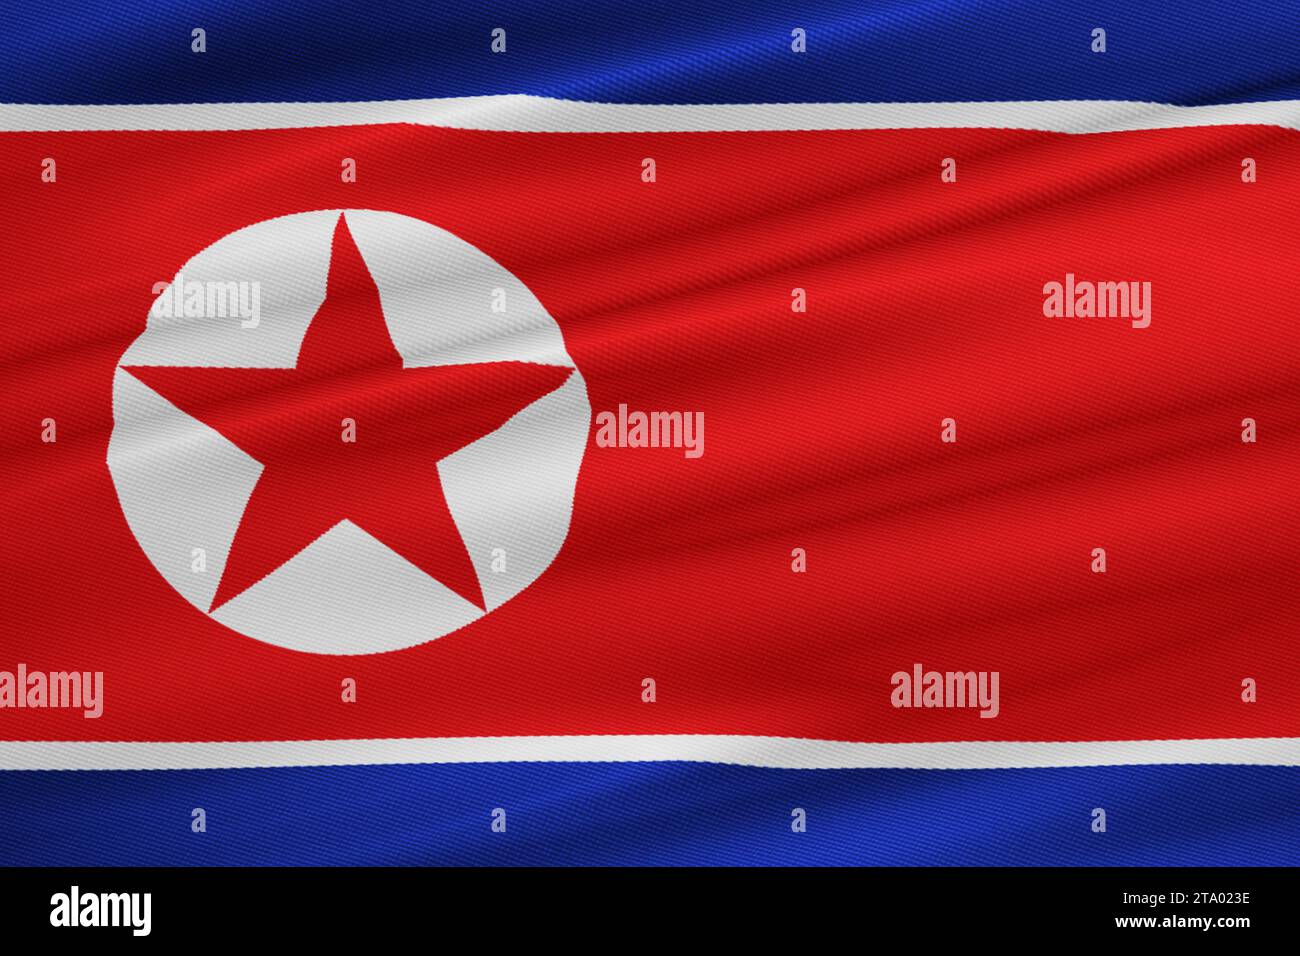 3D rendering, north korea flag waving texture fabric background, crisis of north and south korea, korean risk nuclear bomb war concept Stock Photo